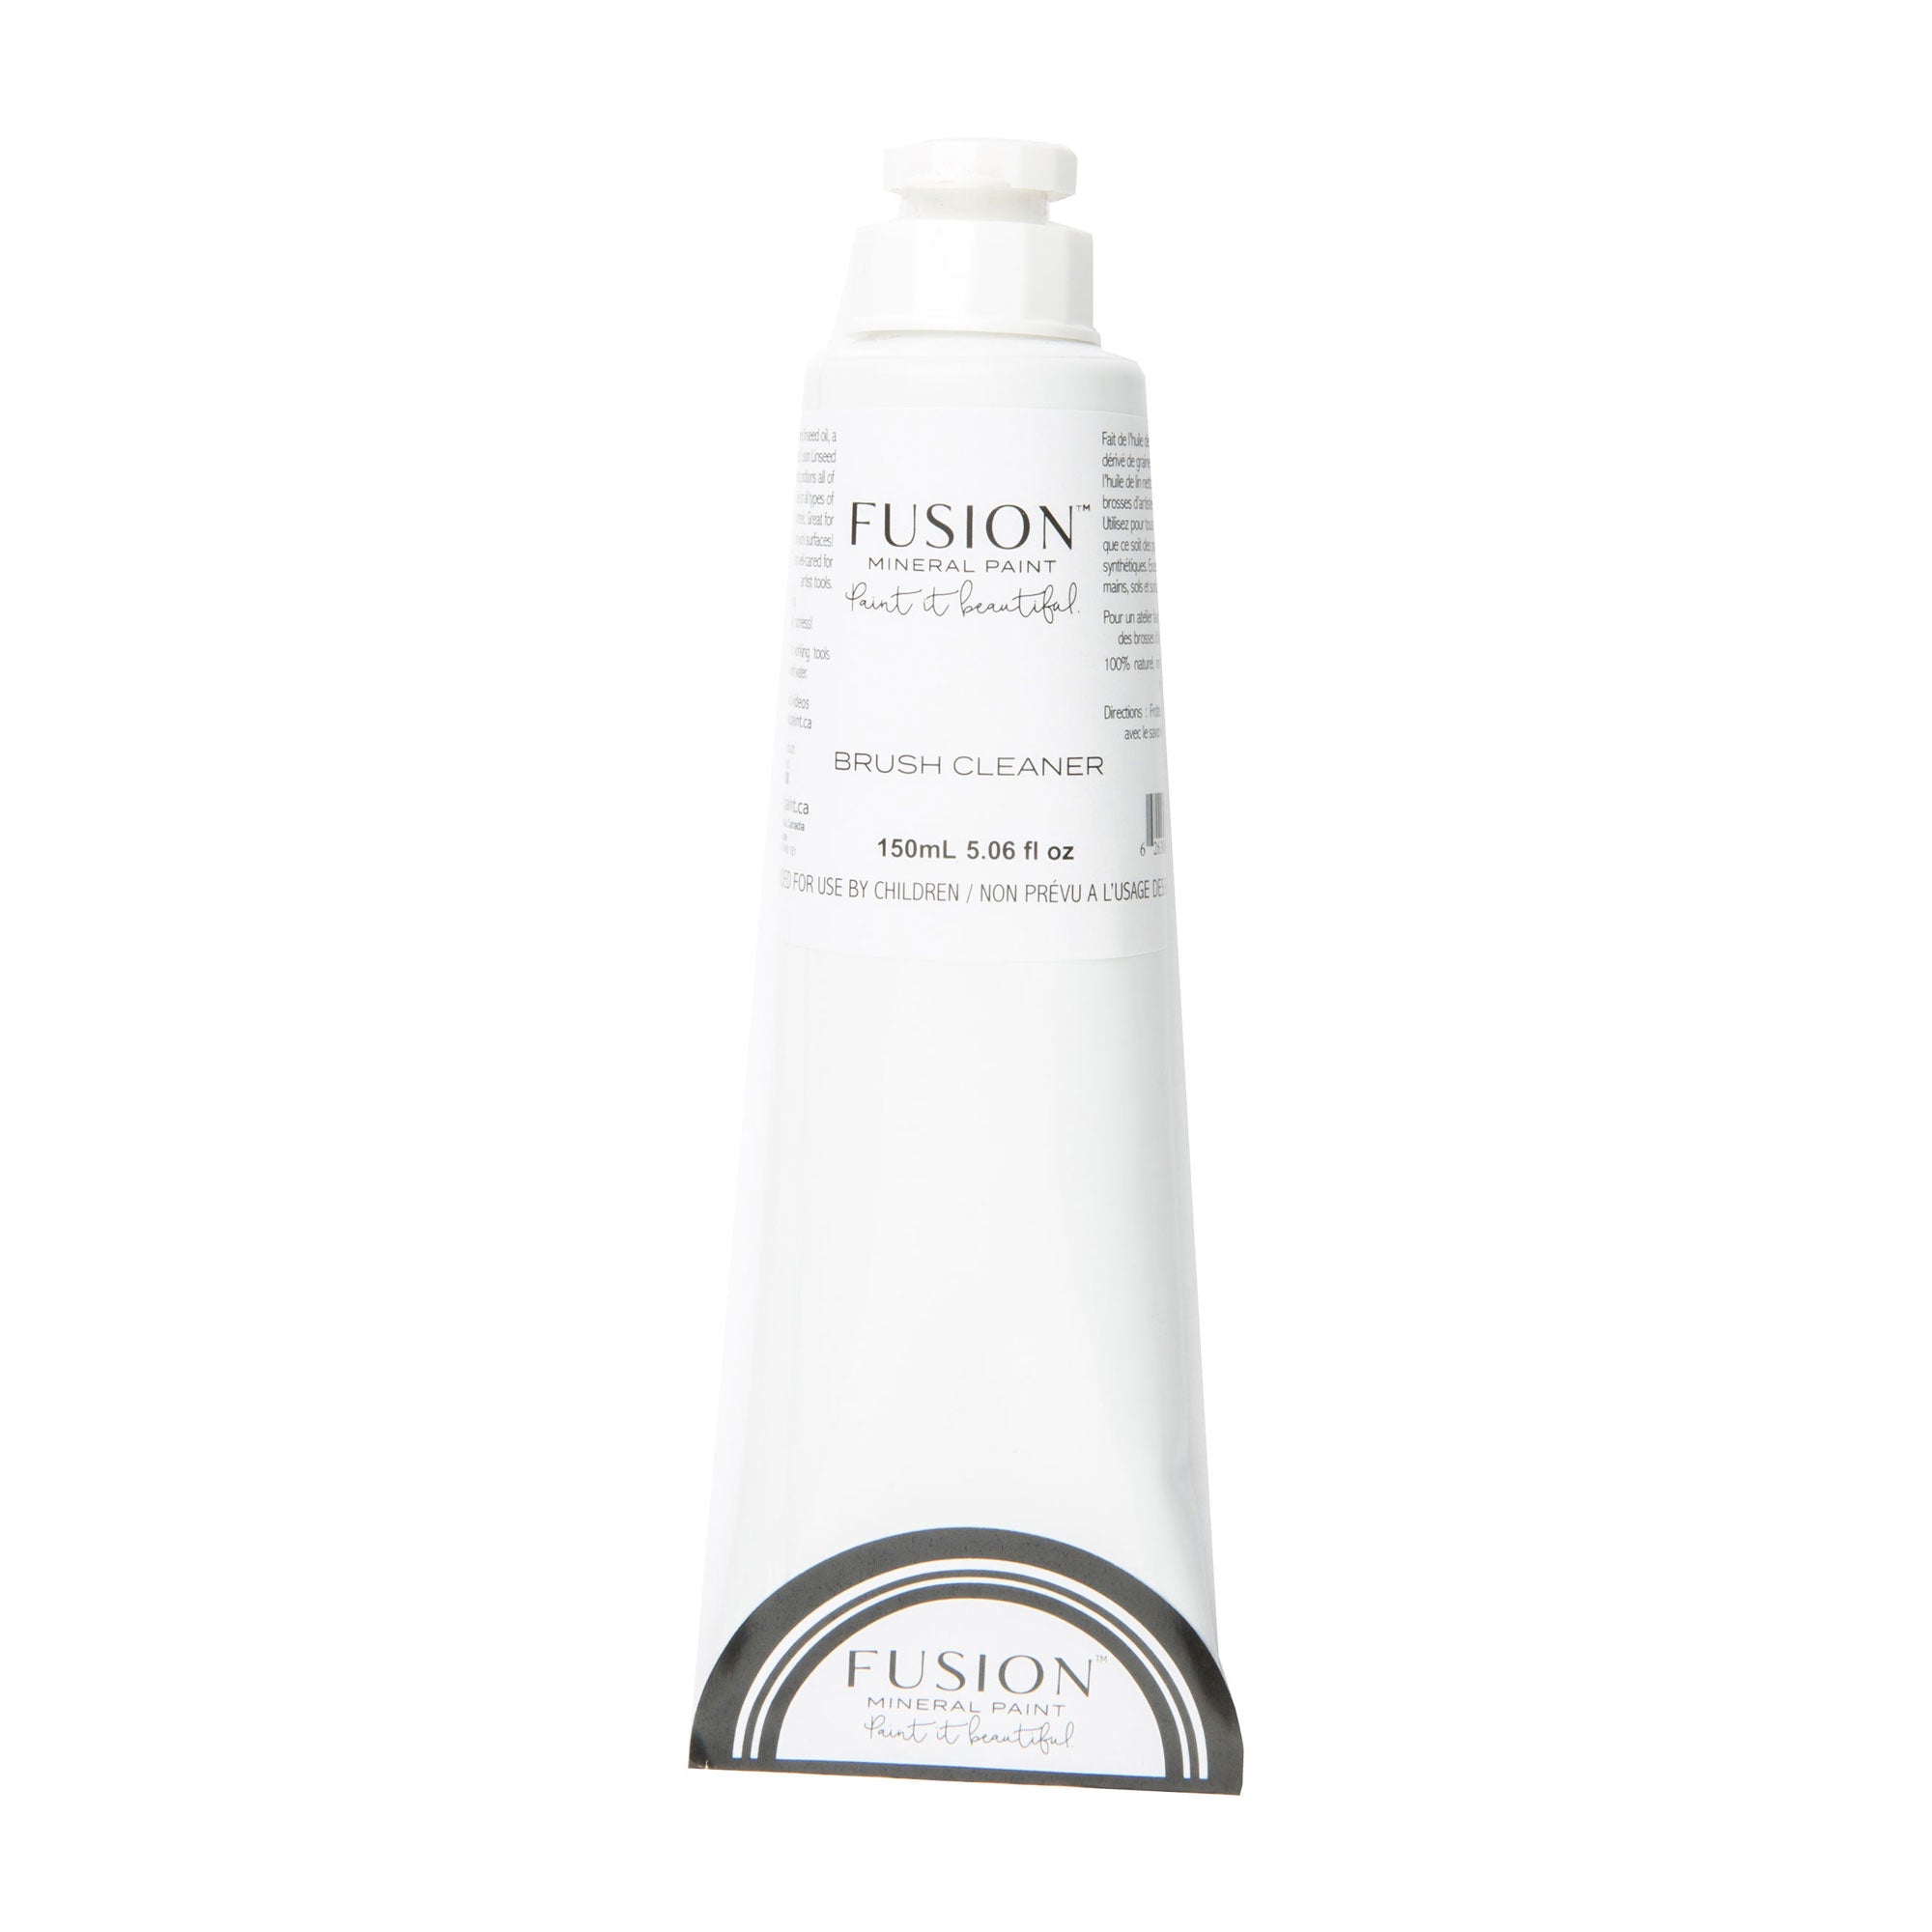 Fusion Mineral Paint - Brush Cleaner